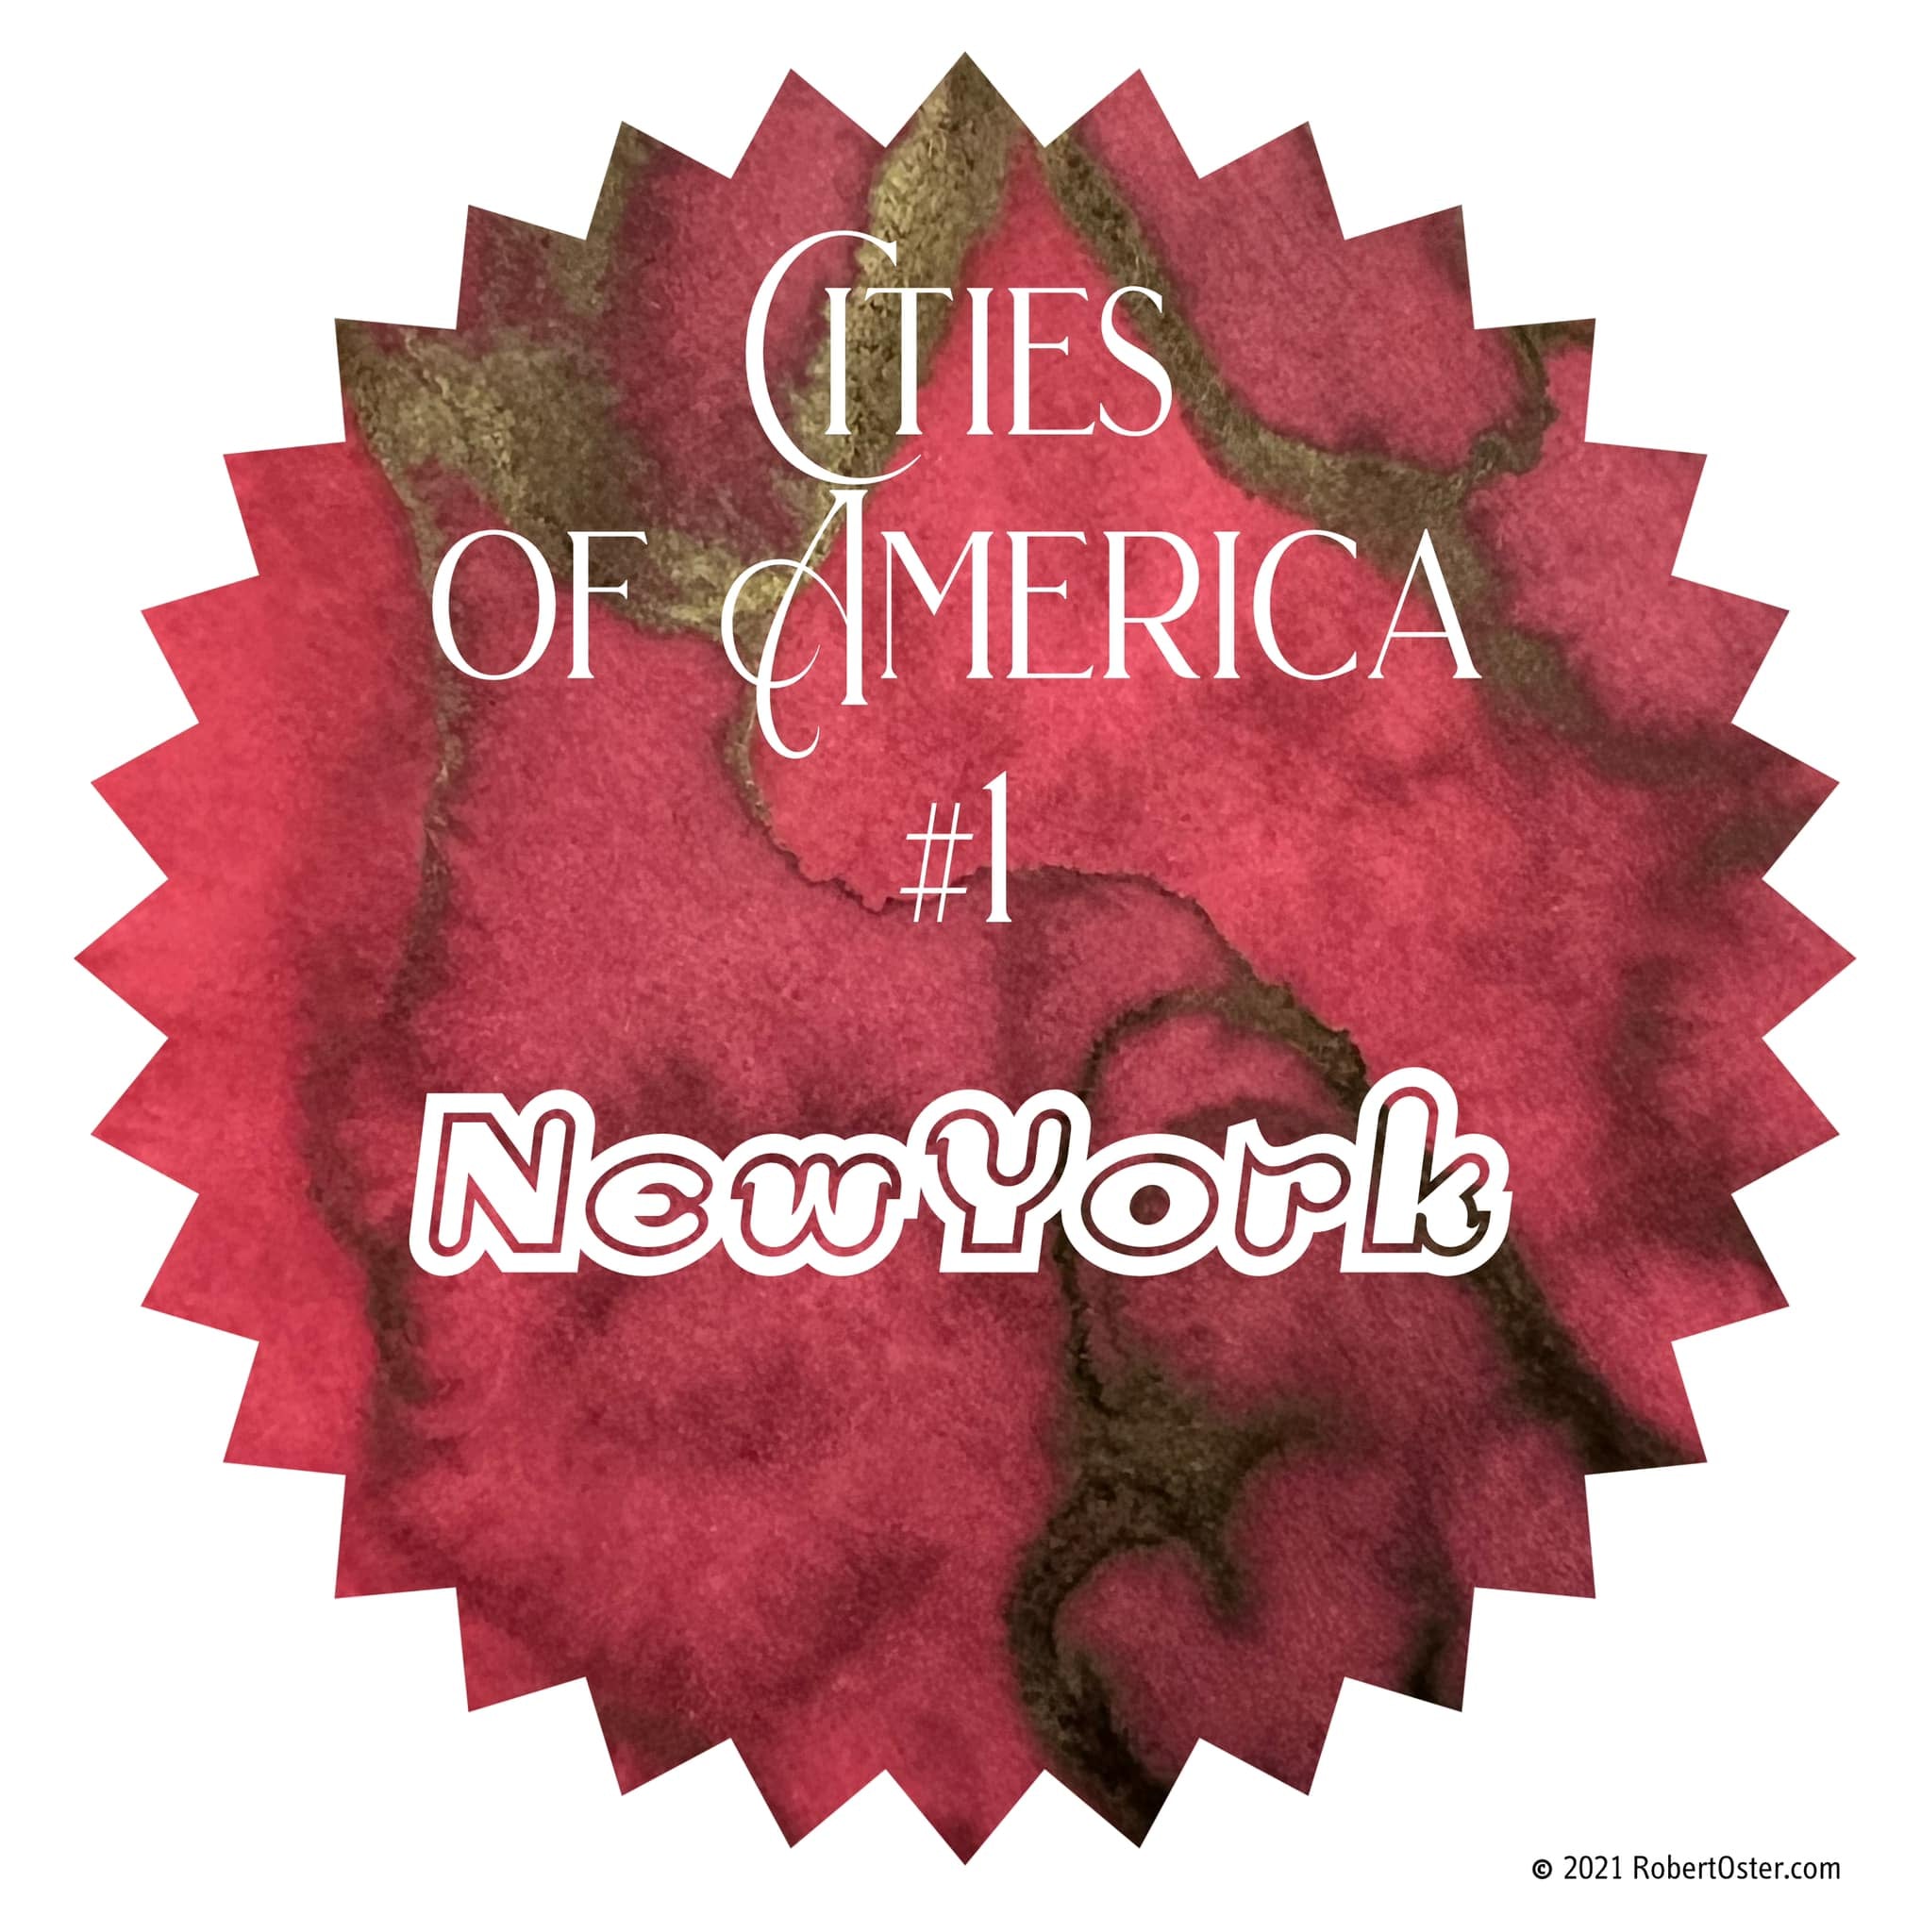 Robert Oster Signature Ink Bottle Cities of America LE New York - Pencraft the boutique